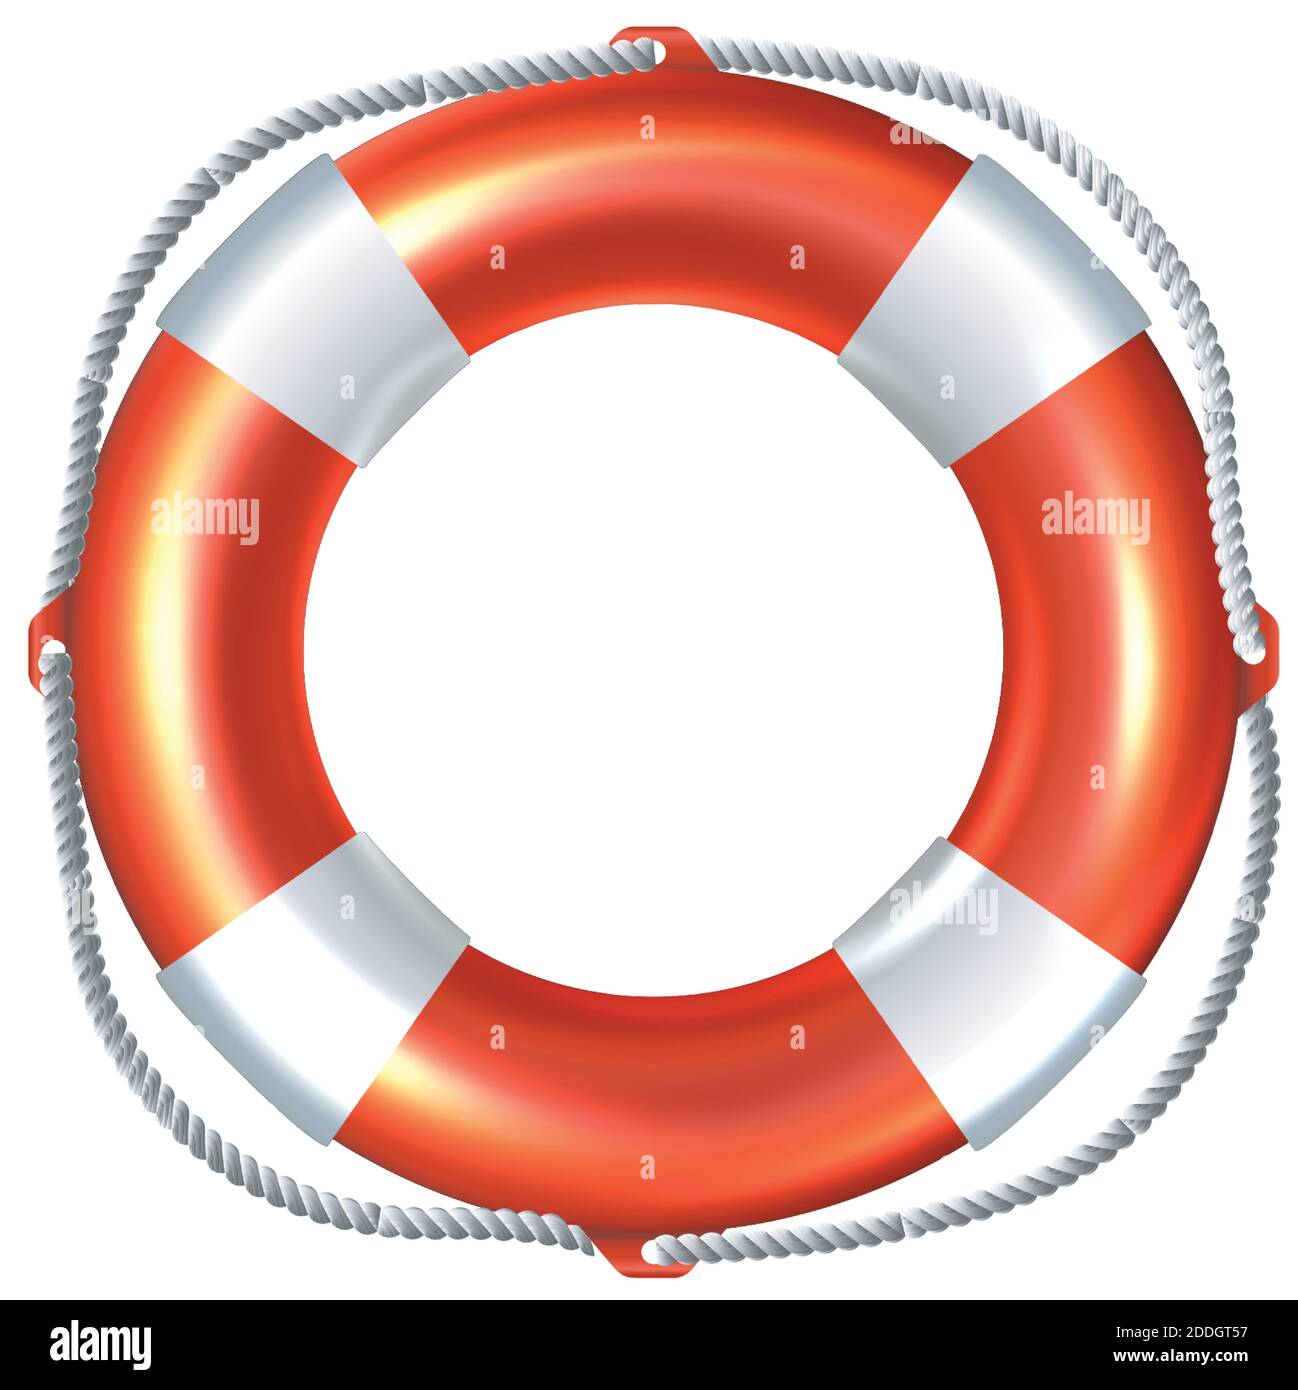 3d realistic vector icon illustration of striped life raft. Isolated on white background. Stock Vector